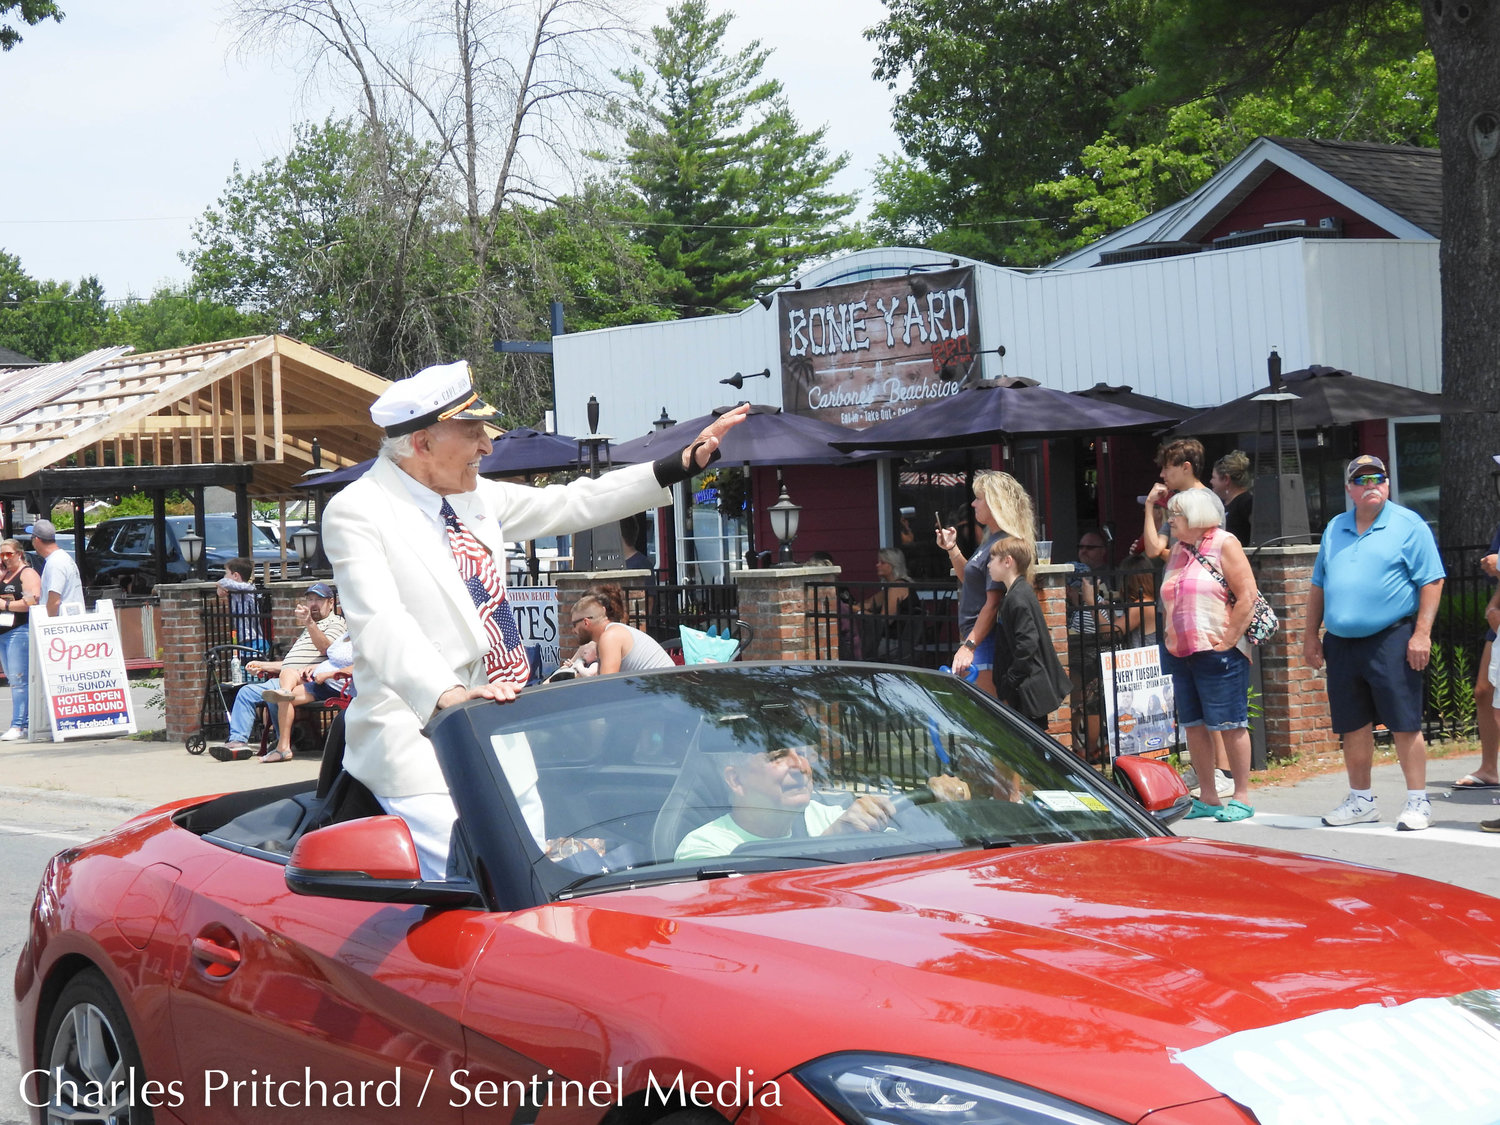 The Sylvan Beach Pirate's Parade makes its way down Main Street. Pictured is Sylvan Beach's own Captain John, waving to attendees of the parade.